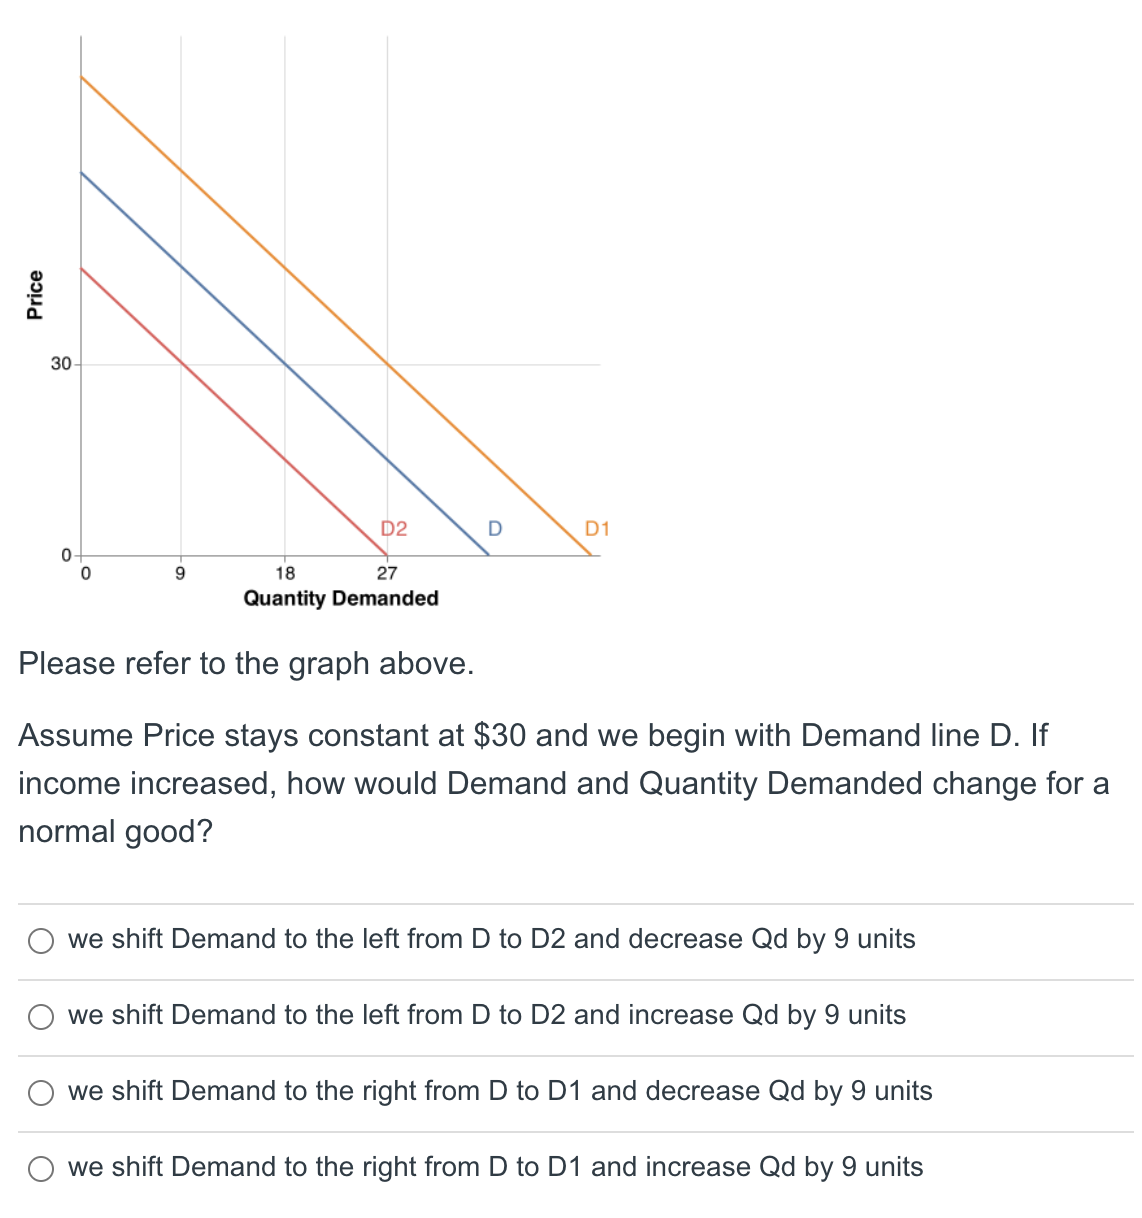 Price
30-
0
0
9
D2
18
27
Quantity Demanded
D
D1
Please refer to the graph above.
Assume Price stays constant at $30 and we begin with Demand line D. If
income increased, how would Demand and Quantity Demanded change for a
normal good?
we shift Demand to the left from D to D2 and decrease Qd by 9 units
we shift Demand to the left from D to D2 and increase Qd by 9 units
we shift Demand to the right from D to D1 and decrease Qd by 9 units
we shift Demand to the right from D to D1 and increase Qd by 9 units